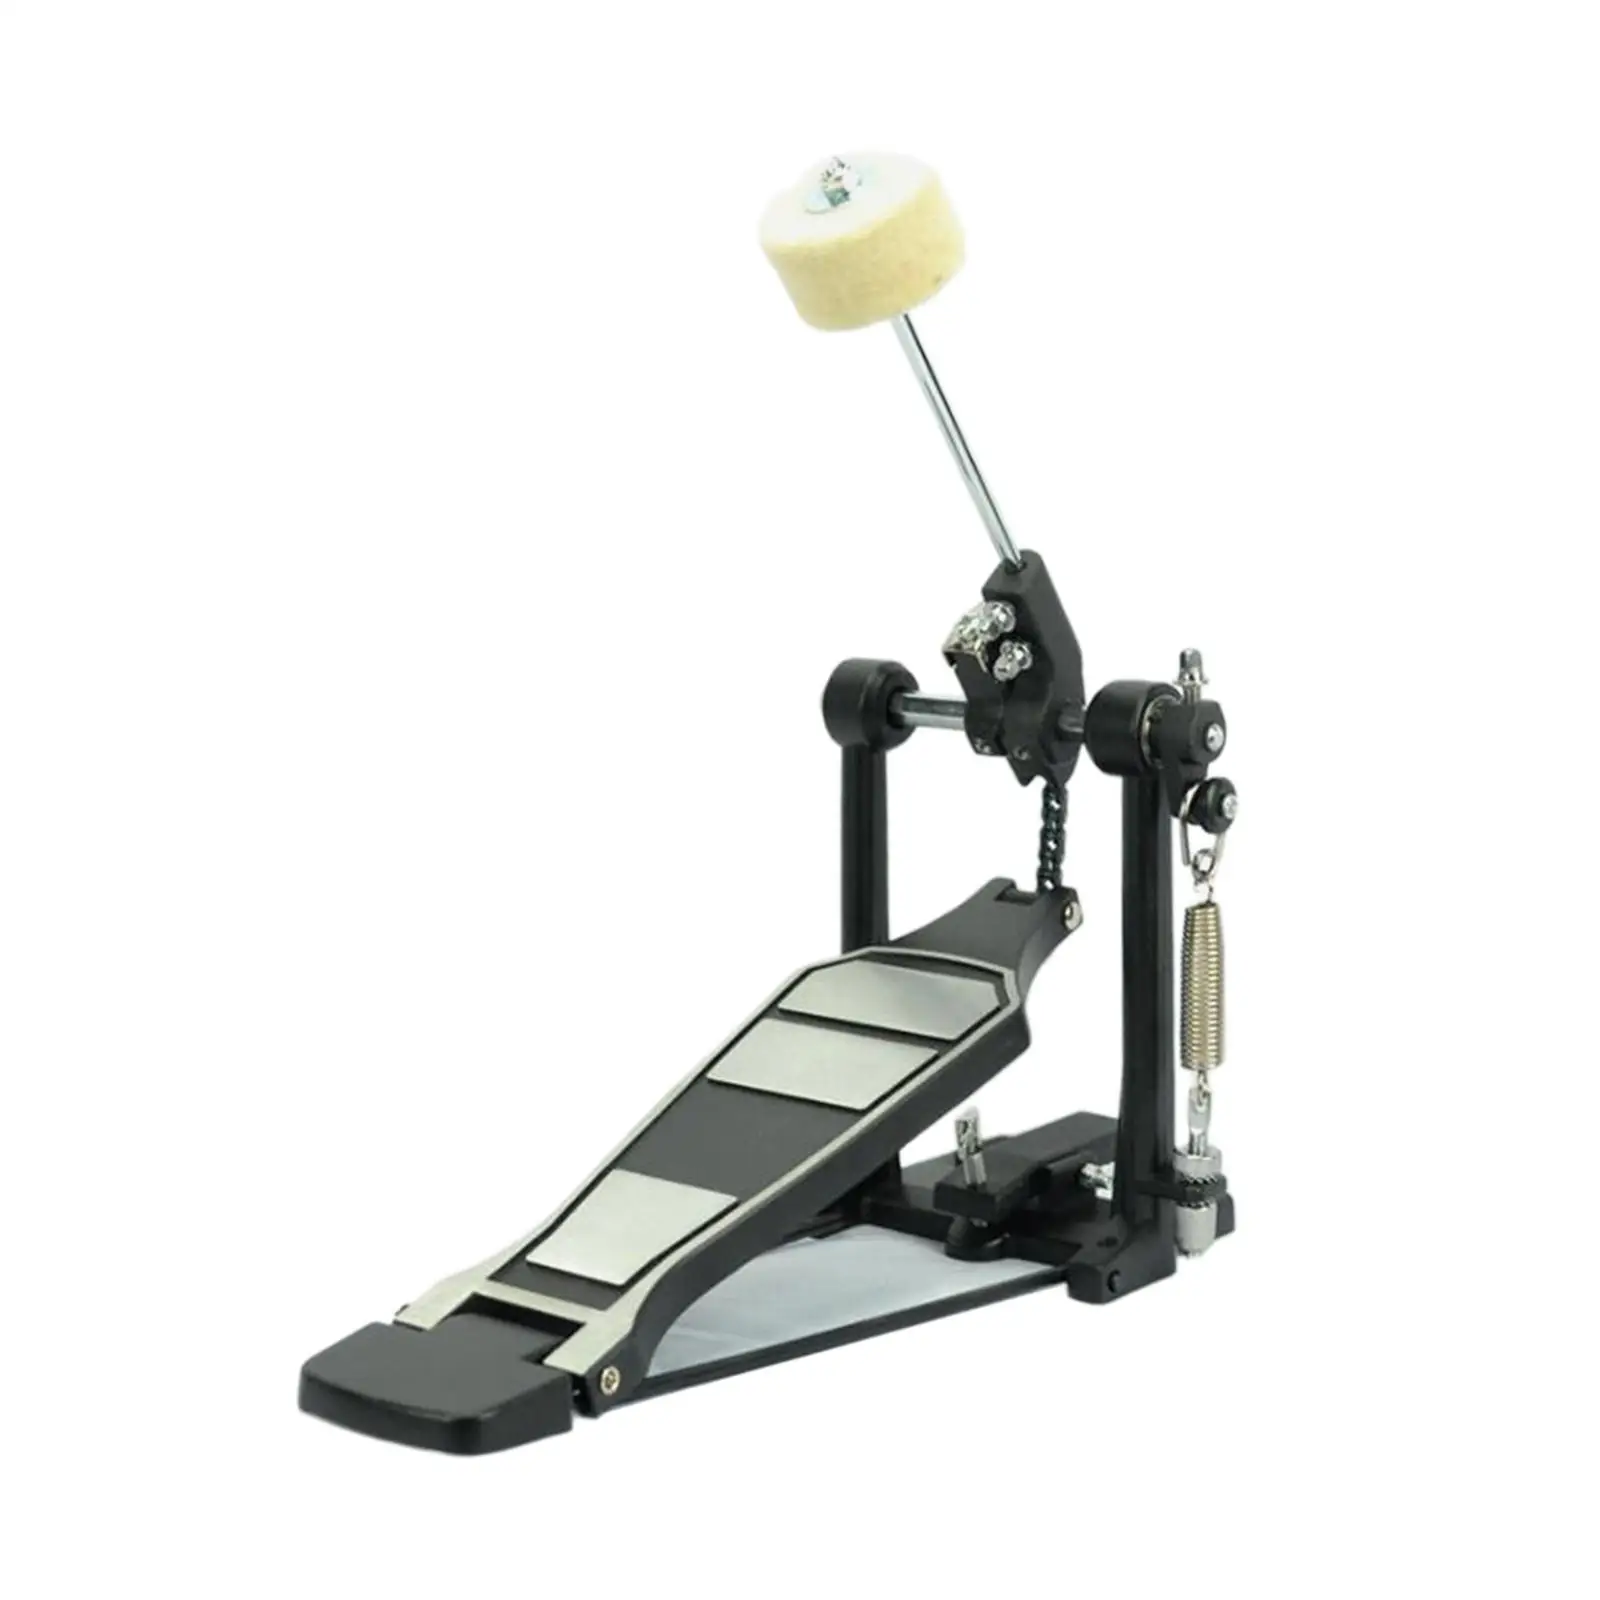 Bass Drum Pedal Drum Practice Instrument Accessories for Beginner, Pro Drummers Chain Drive Drum Step Drum Foot Pedal Beater